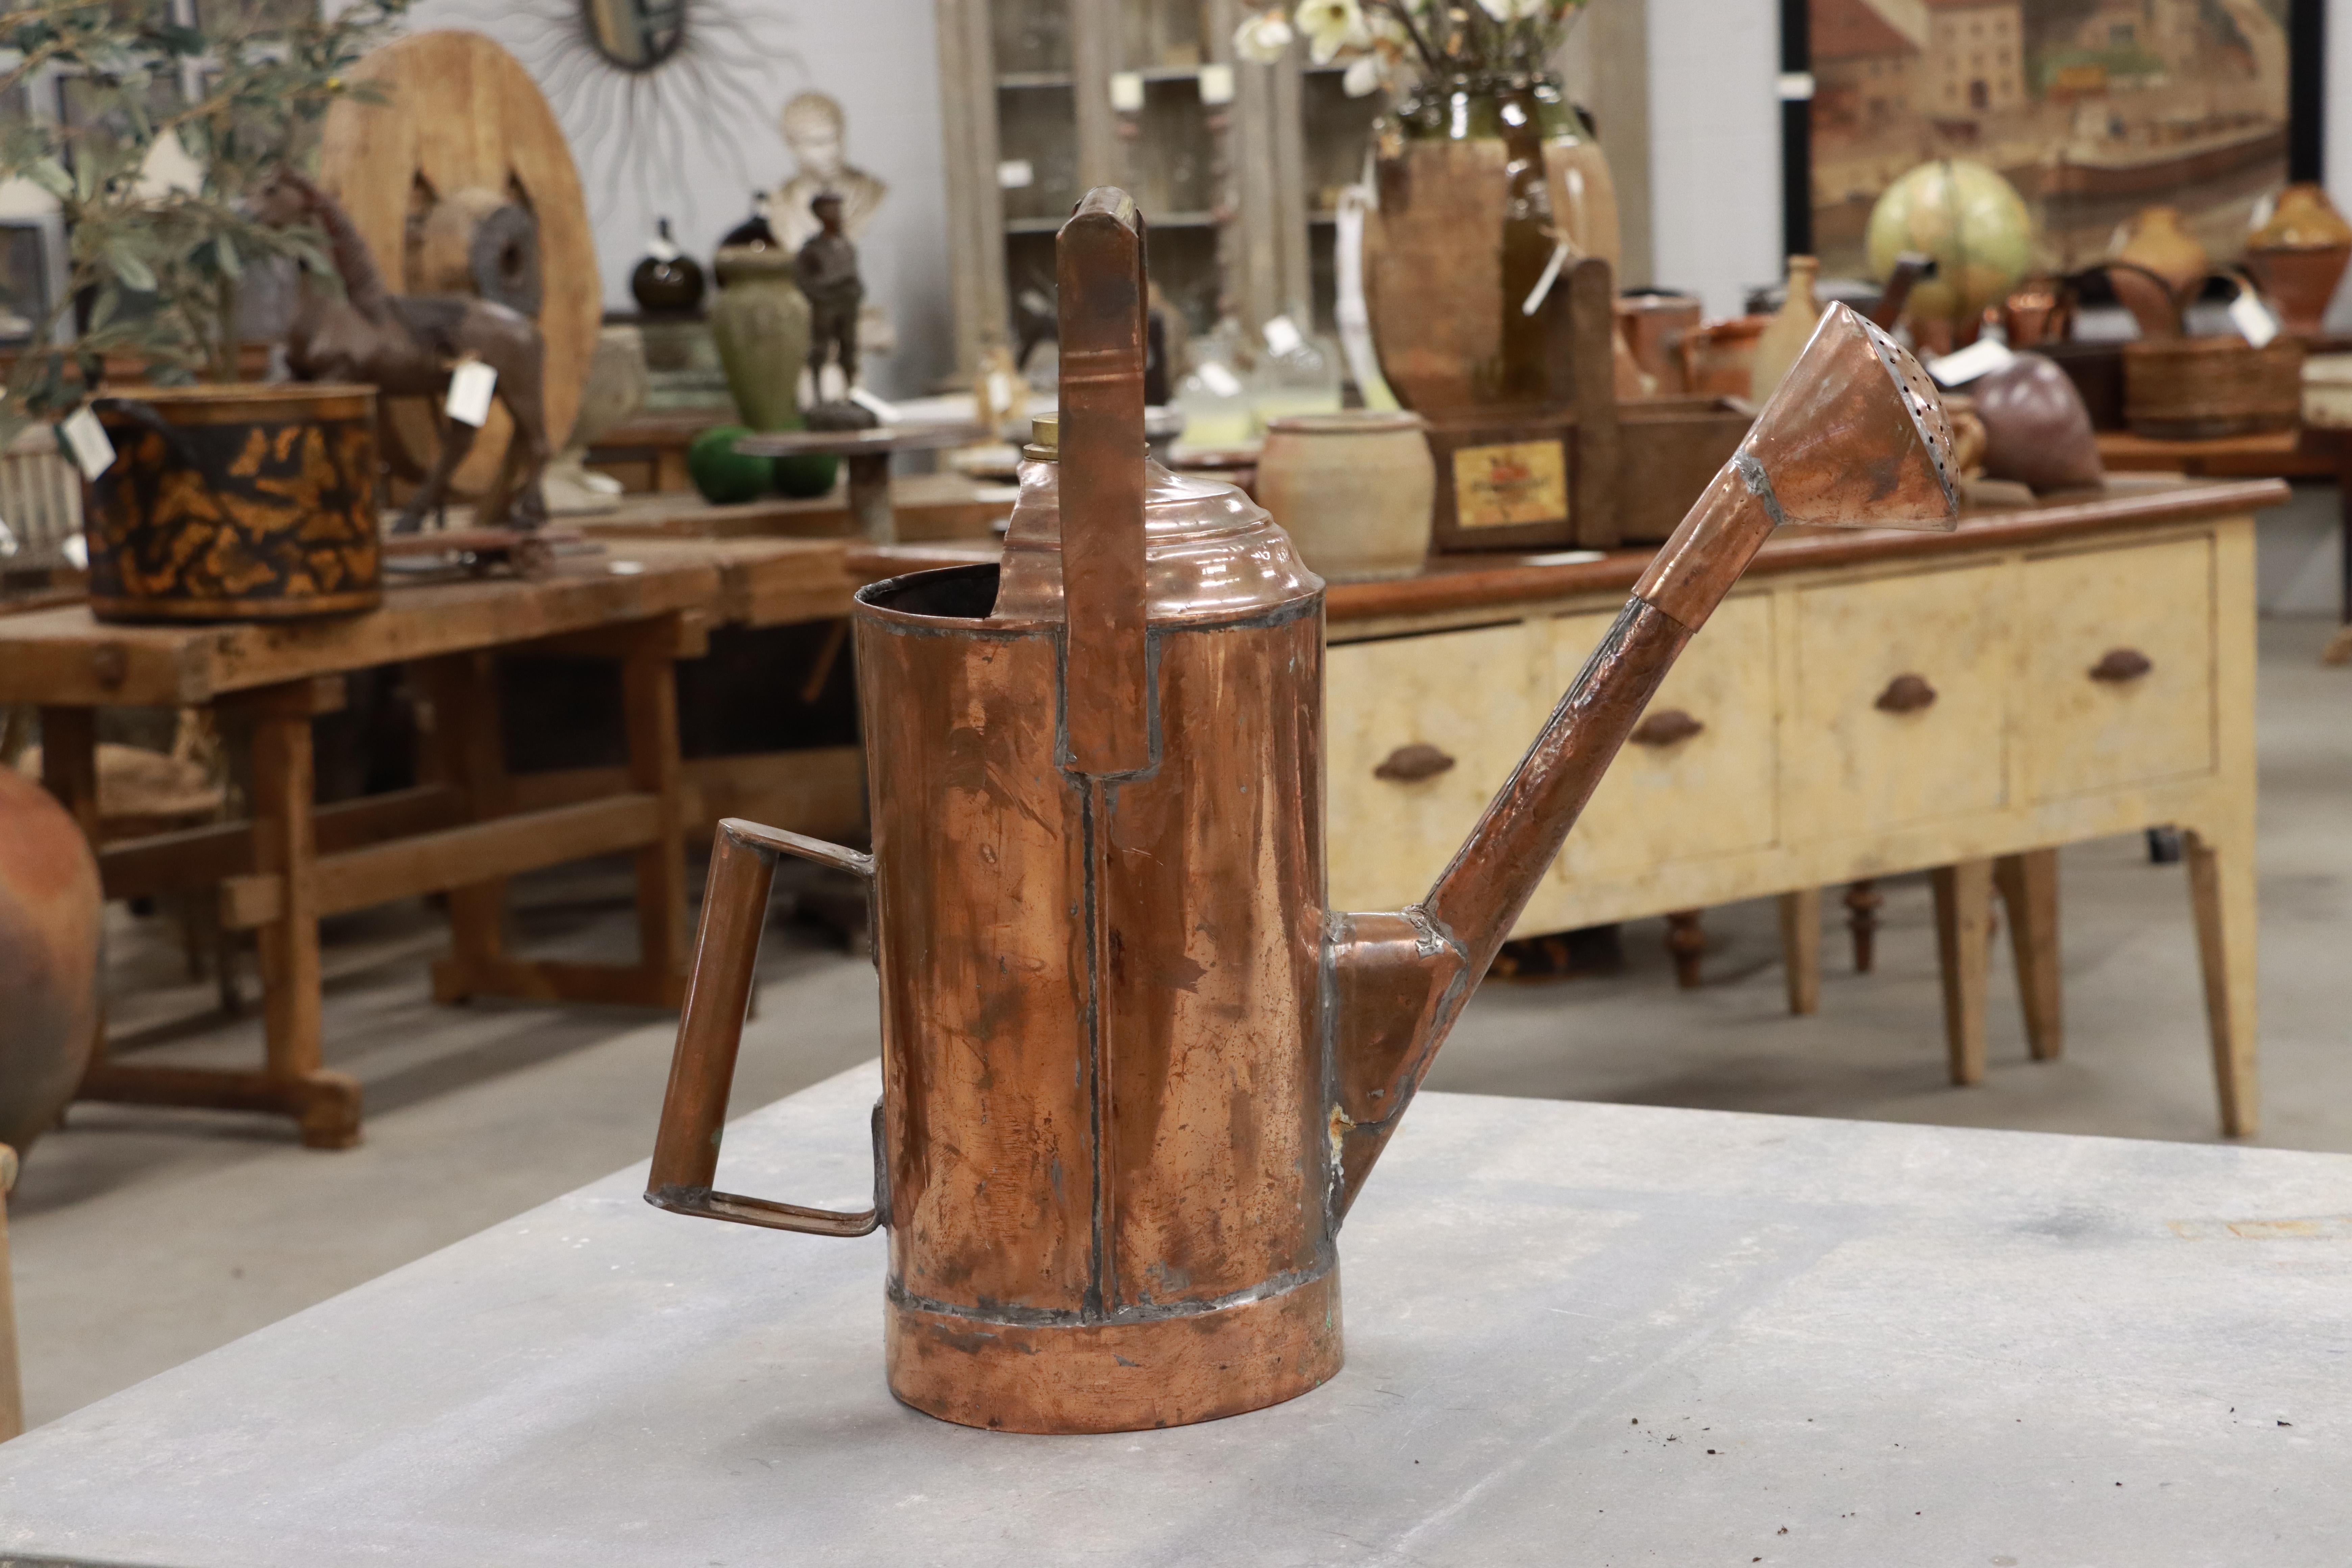 Very unusual two handled tall cylindrical antique French copper watering can with its original rose.

The second handle on a watering can was invented by Englishman, John Hawes in the 1880s. It became much easier and more balanced to water flowers